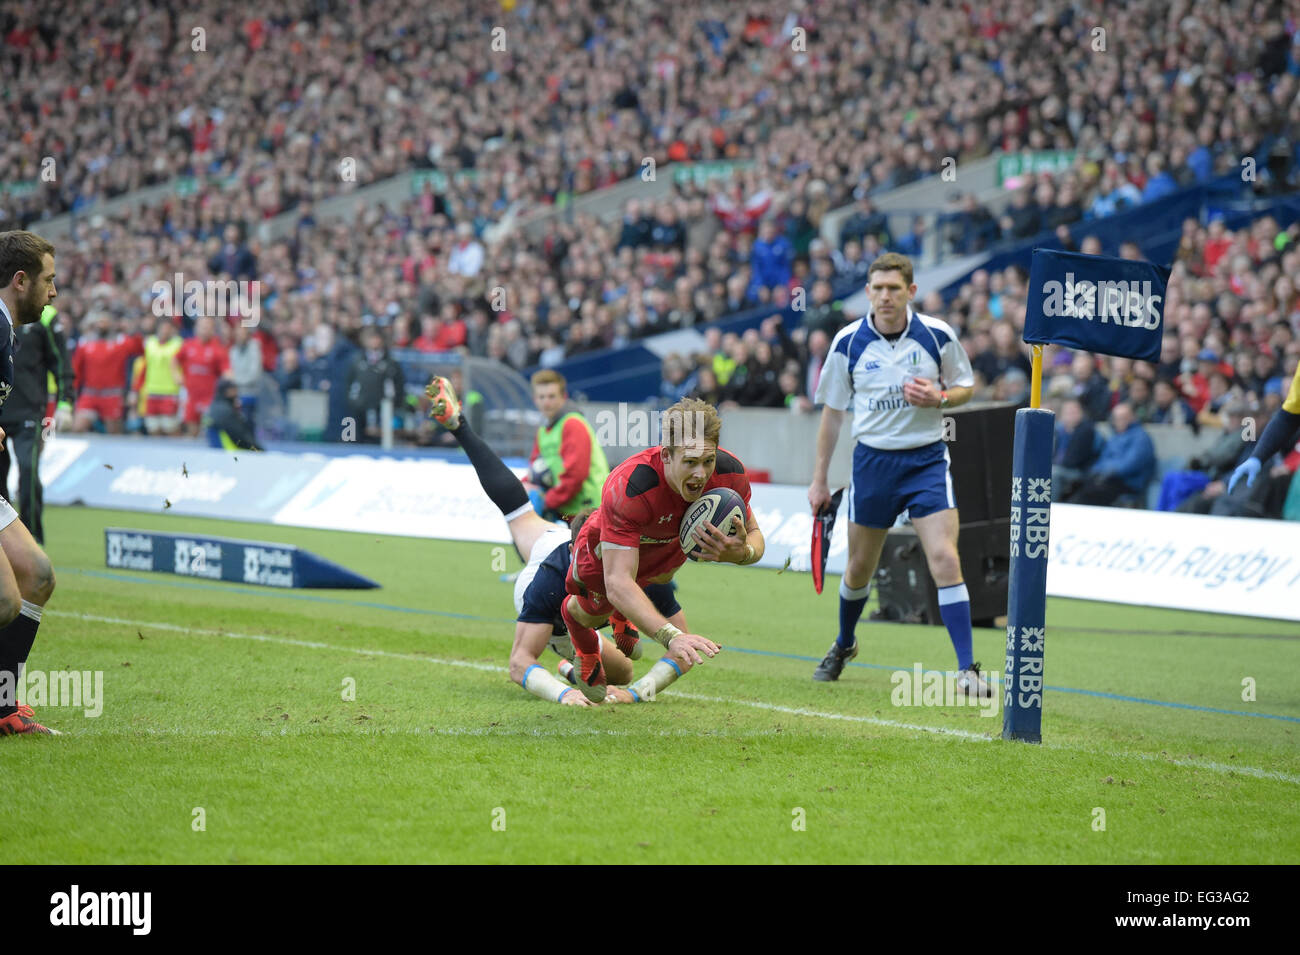 Murrayfield Stadium, Edinburgh, UK, 15th Feb, 2015. RBS 6 Nations 2015 Round 2, Scotland vs Wales Liam Williams ( Wales ) going over for a try that was overturn after a TMO review of a previous tackle leading to him scoring Credit:  Rob Gray/Alamy Live News Stock Photo